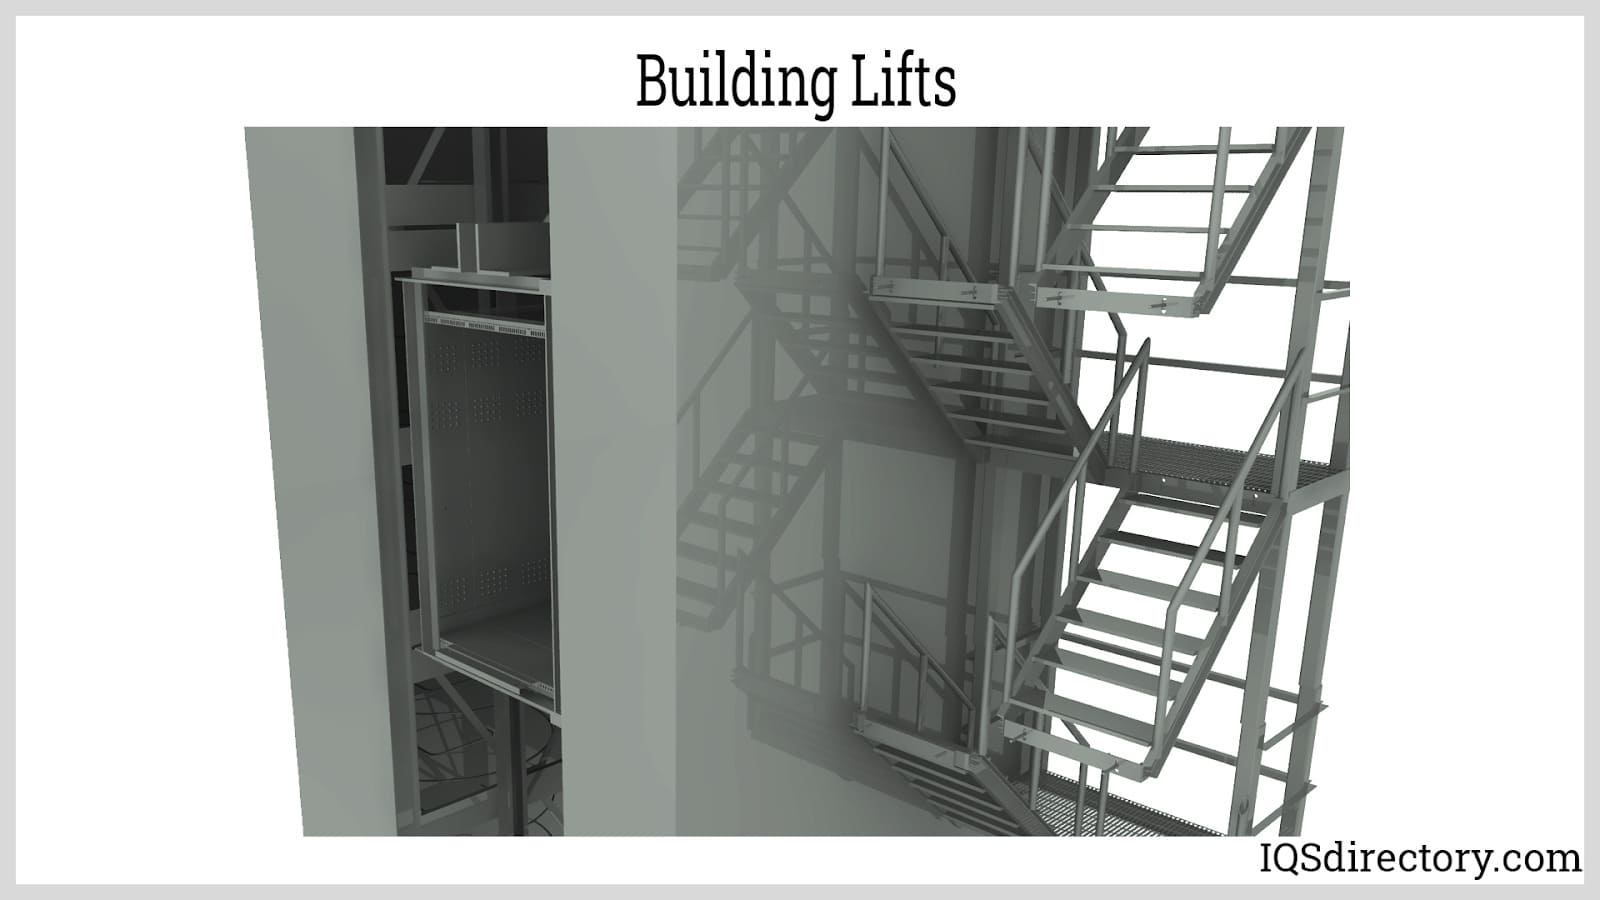 Building Lifts